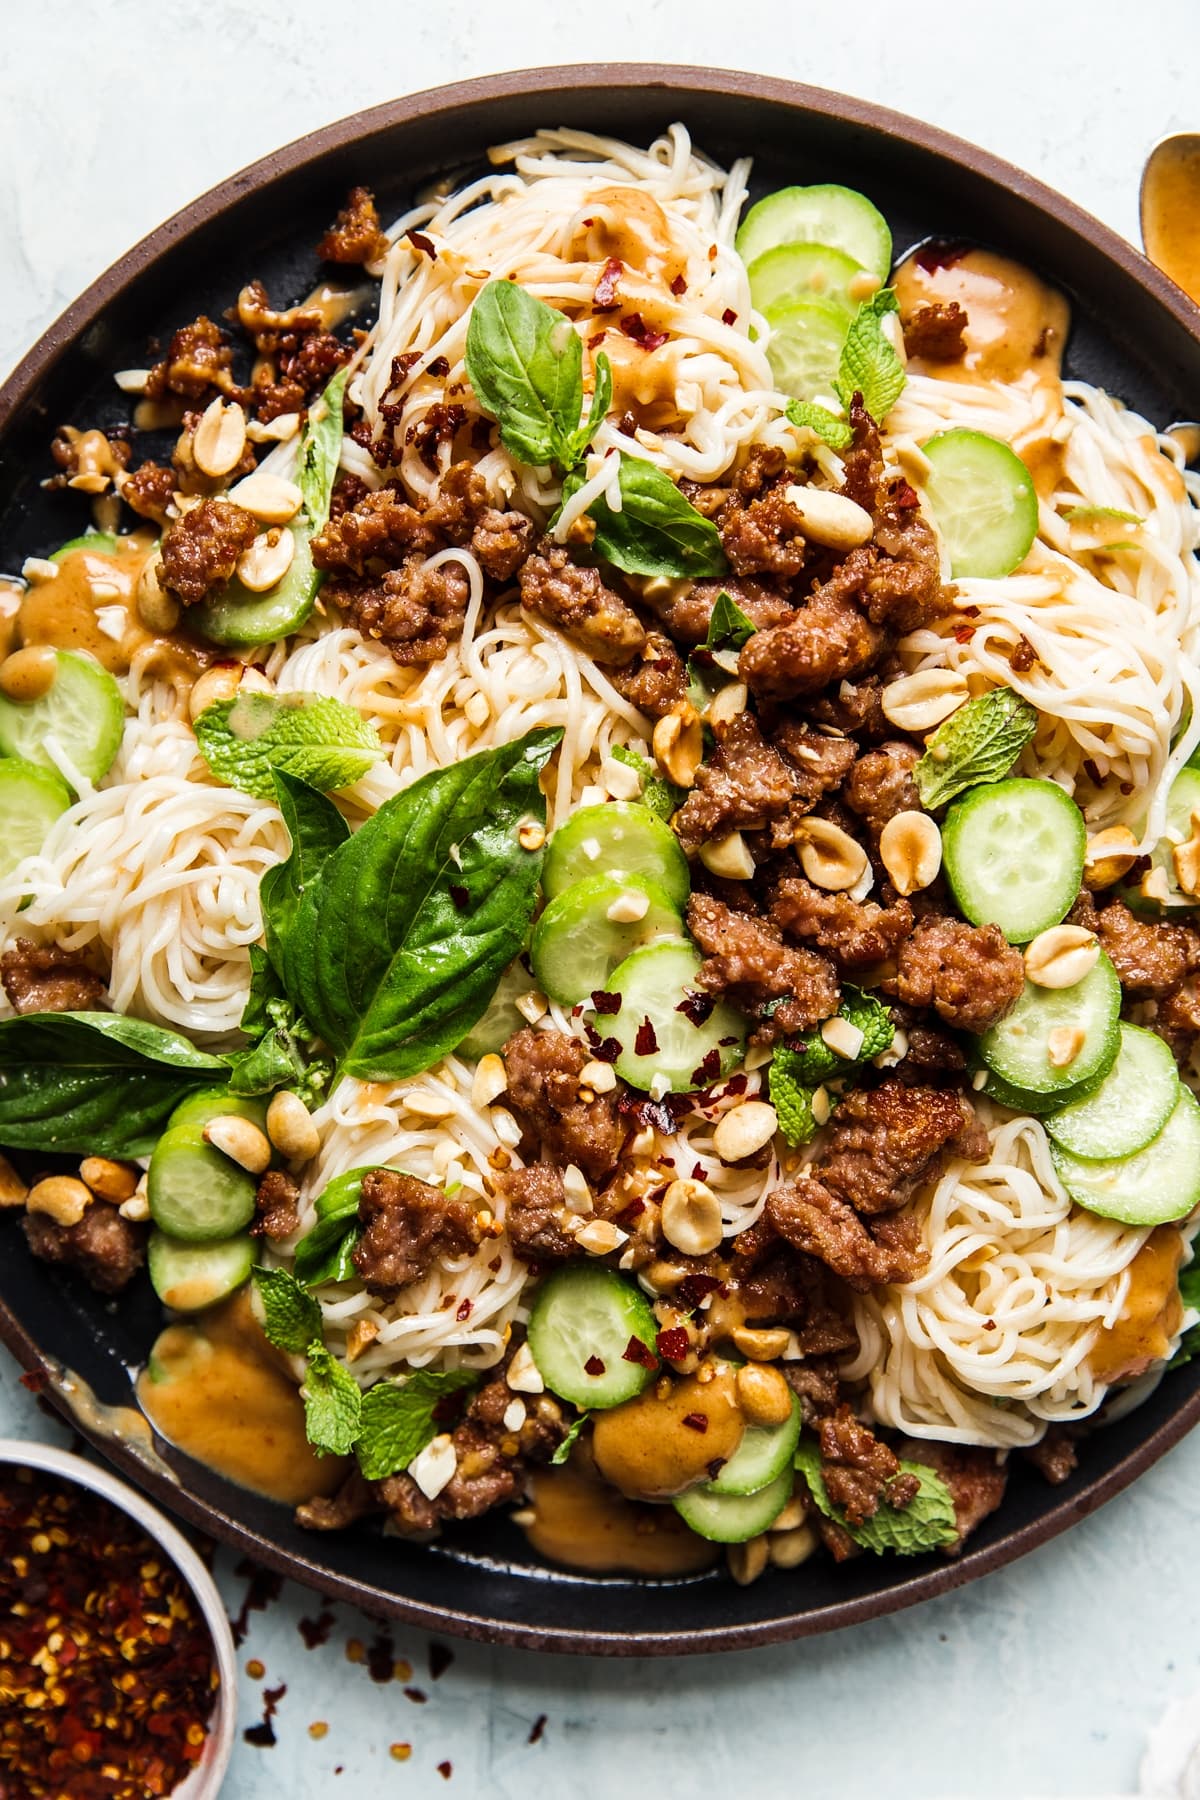 Cold Thai noodle salad topped with peanut dressing, crushed peanuts, ground pork, cucumbers, basil and mint